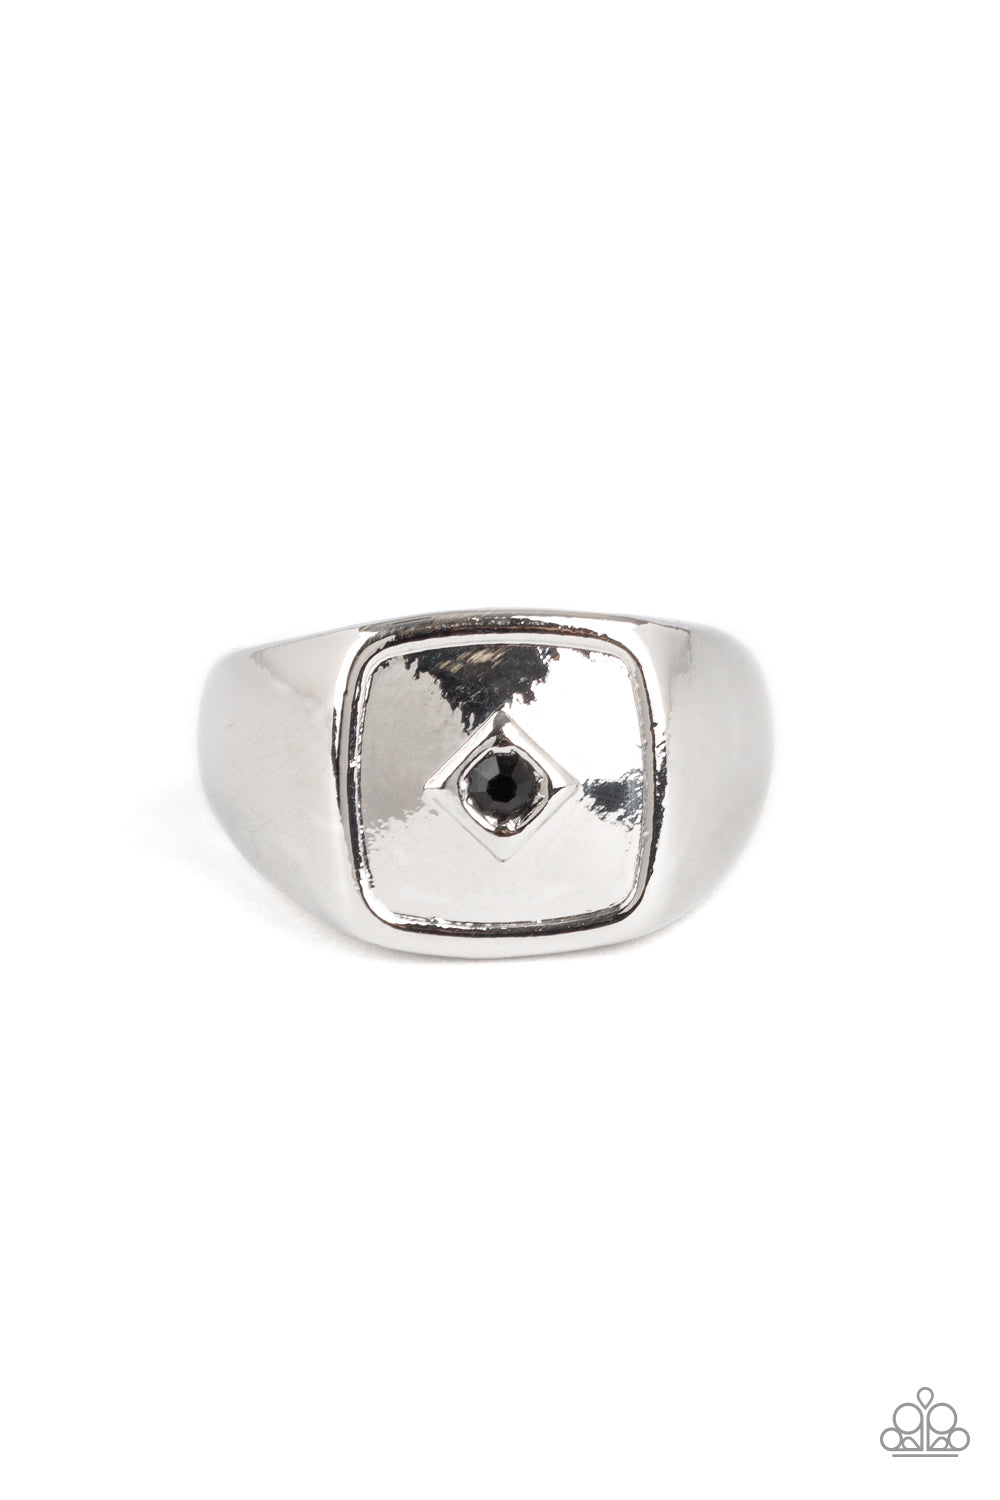 Immortal - Black  A solitaire black rhinestone is pressed into the center of a flattened square frame for a statement look. Features a stretchy band for a flexible fit.  Sold as one individual ring.